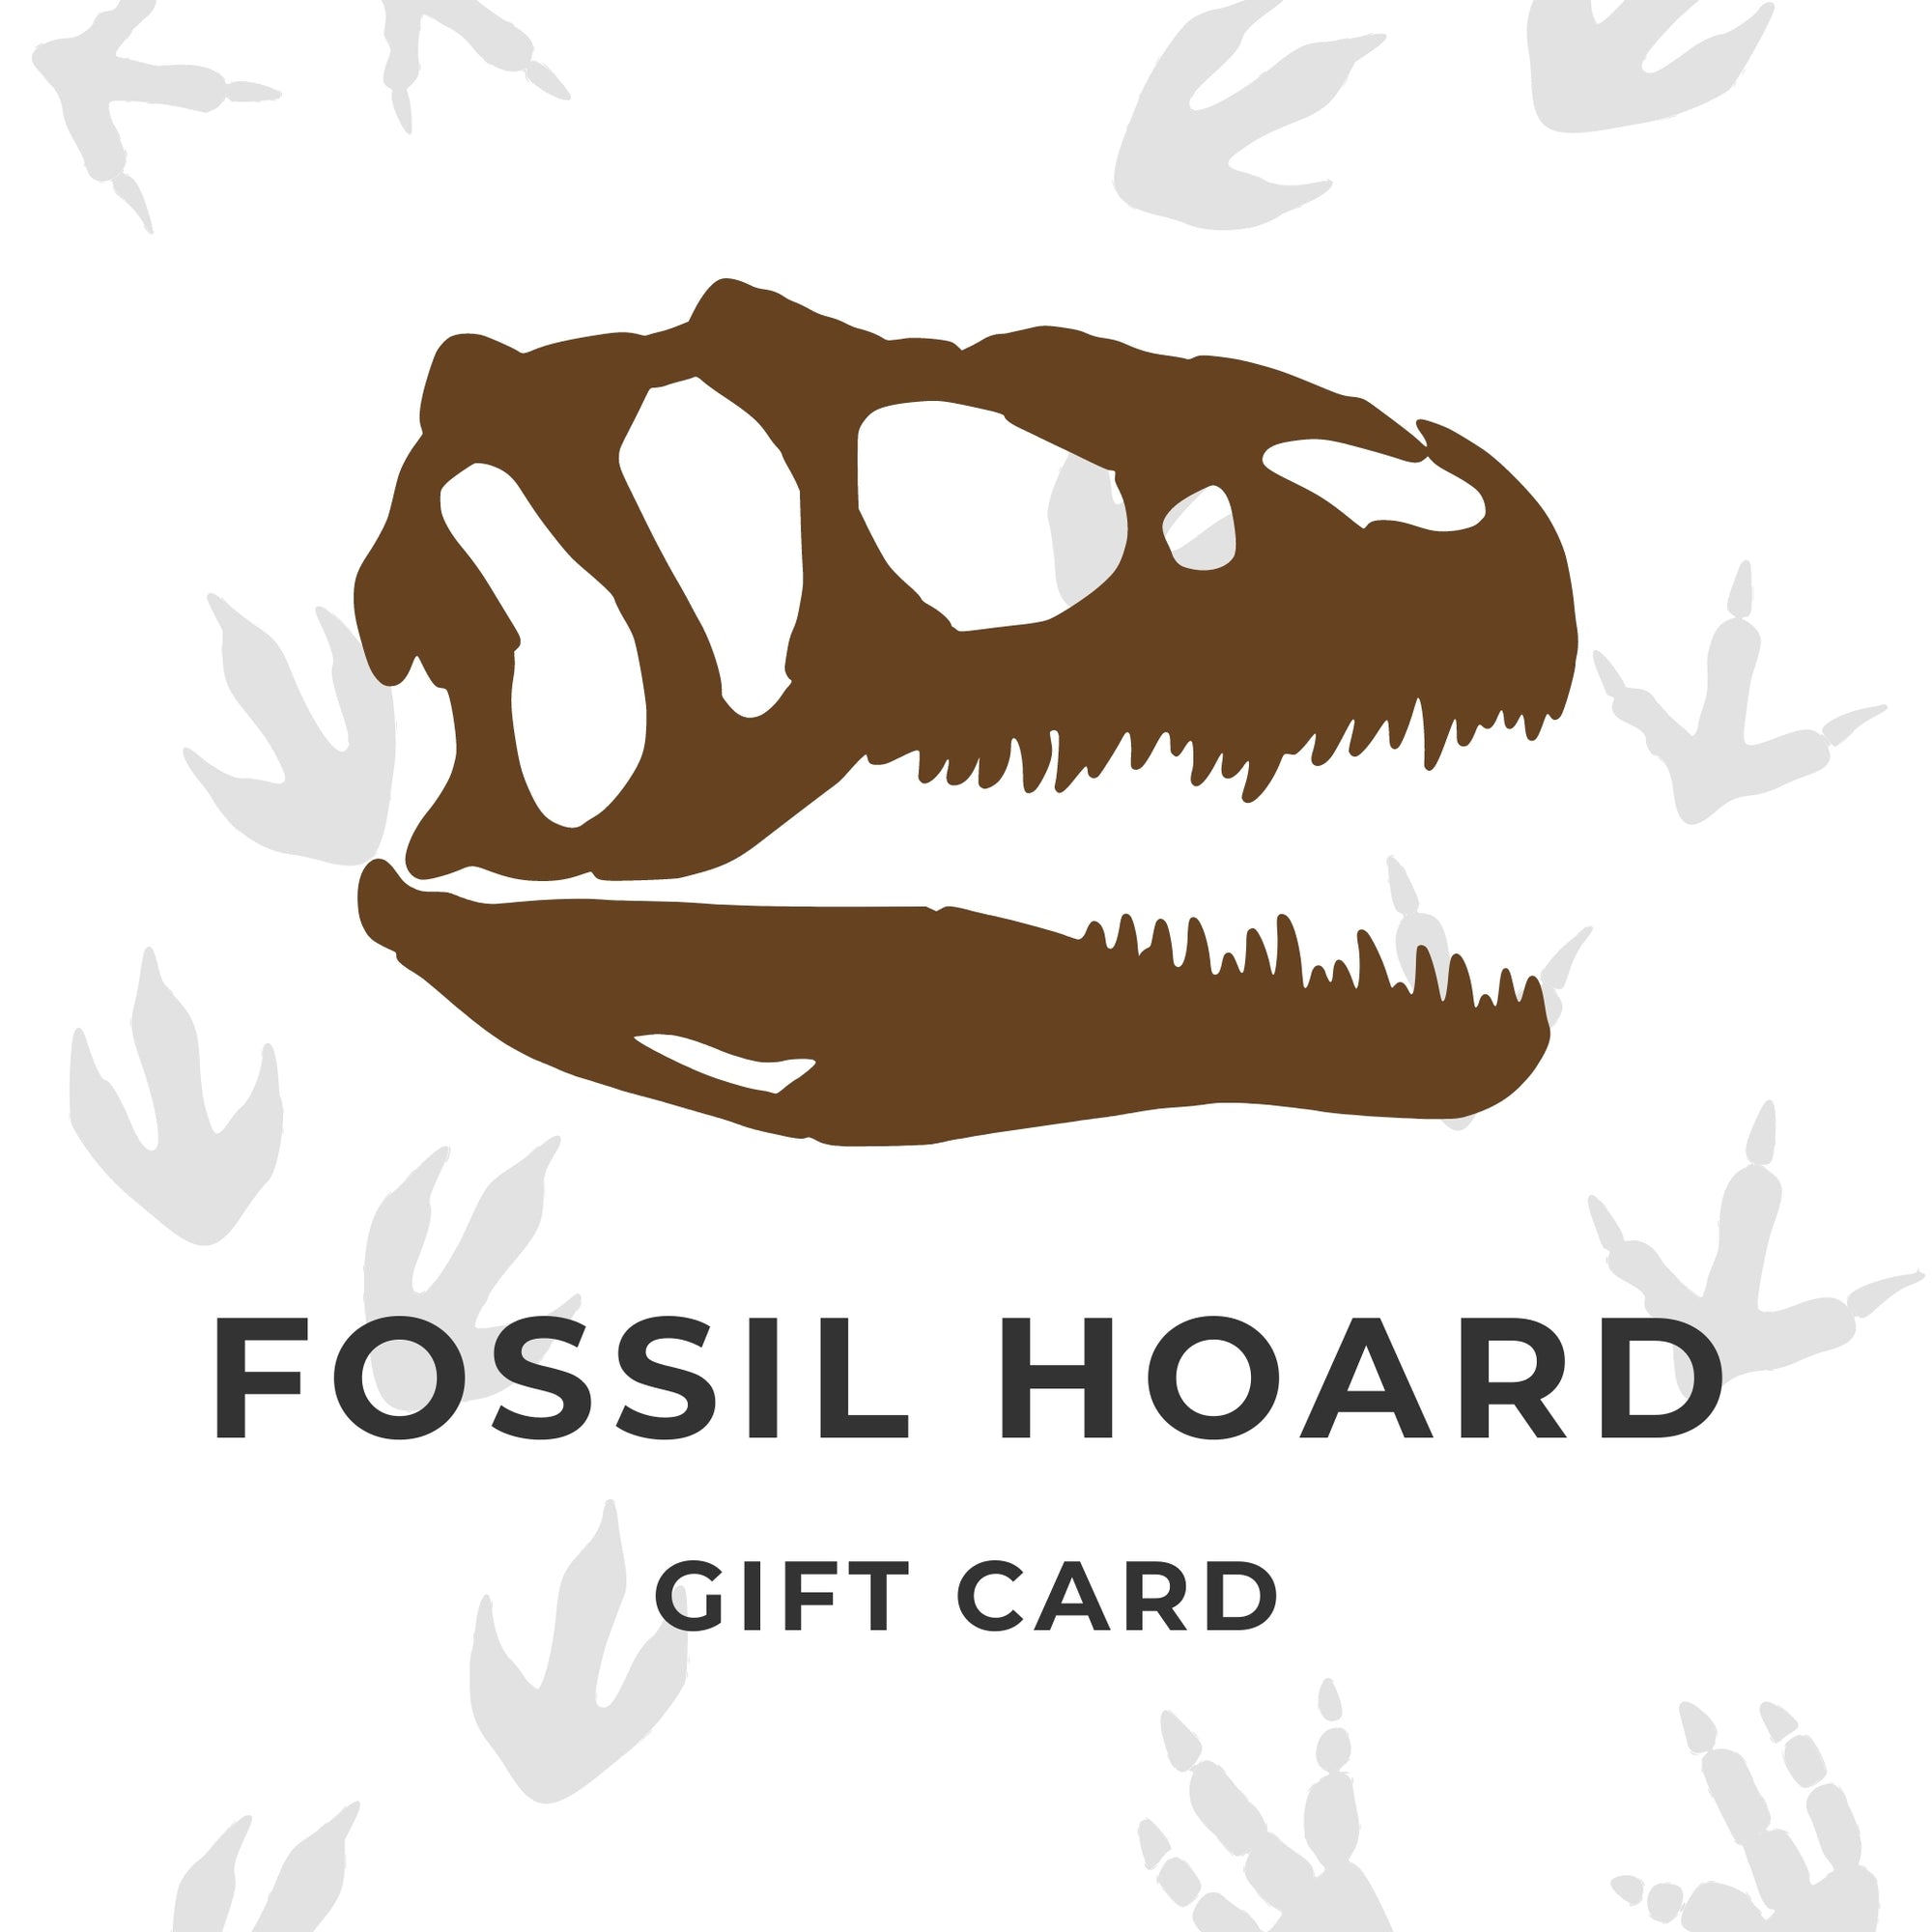 Fossil Hoard Gift Card